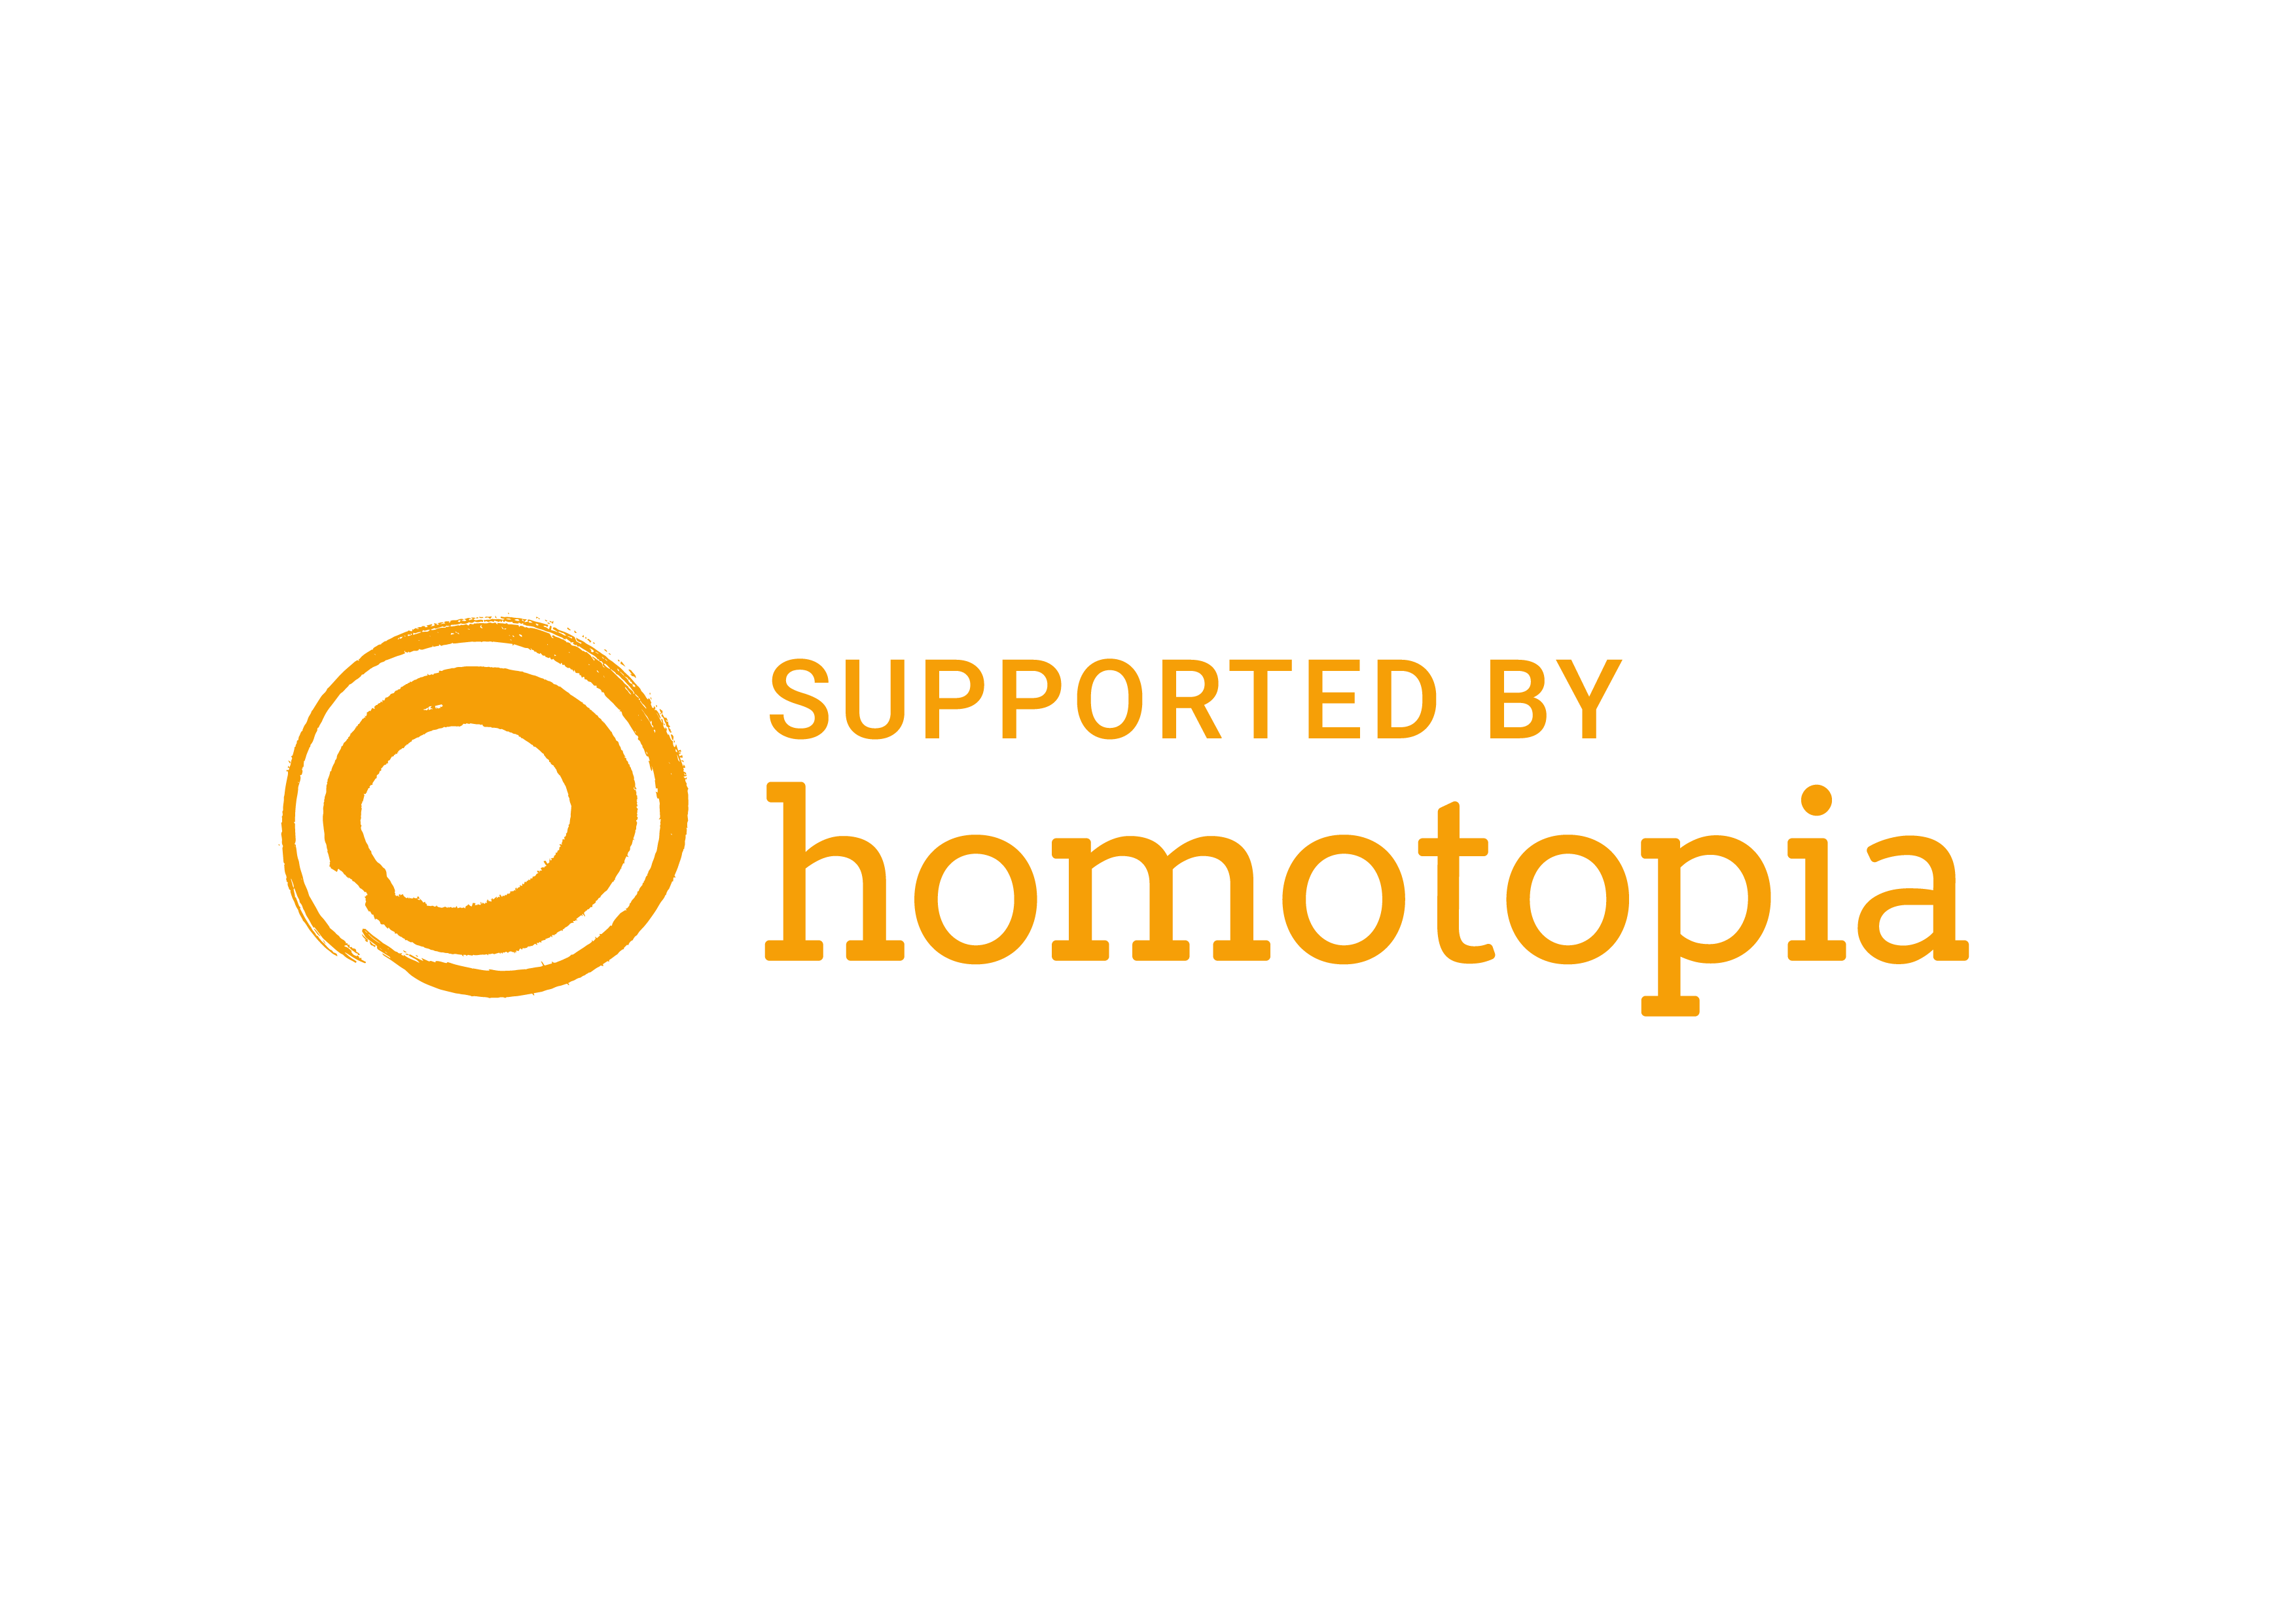 Supported by Homotopia